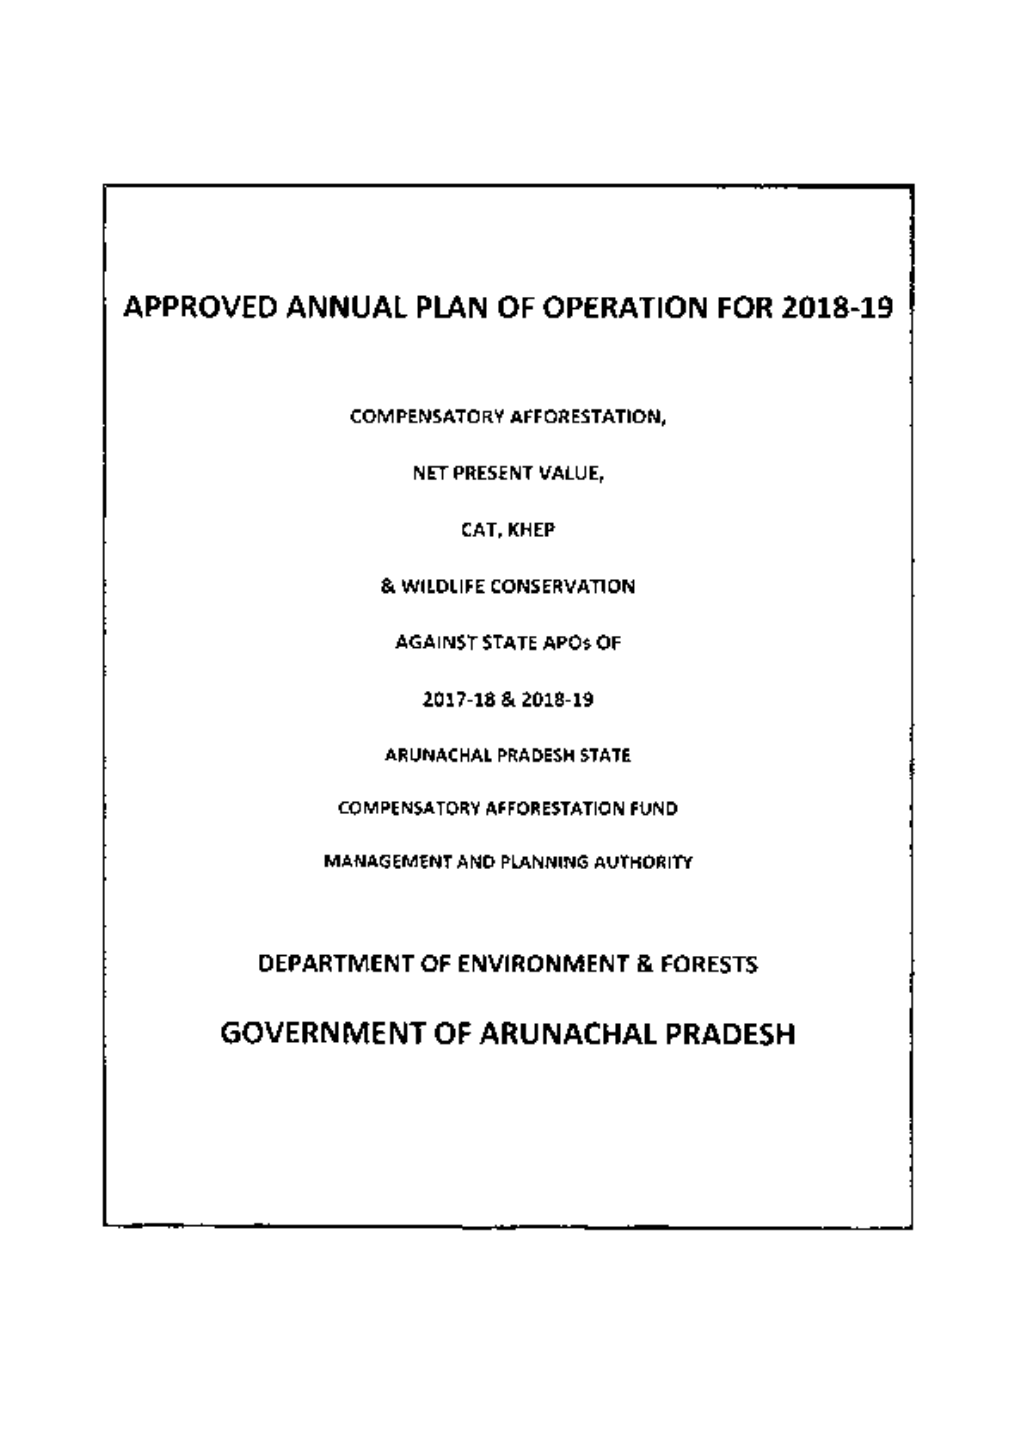 Approved Annual Plan of Operation for 2Ot8-L9 Government of Arunachal Pradesh